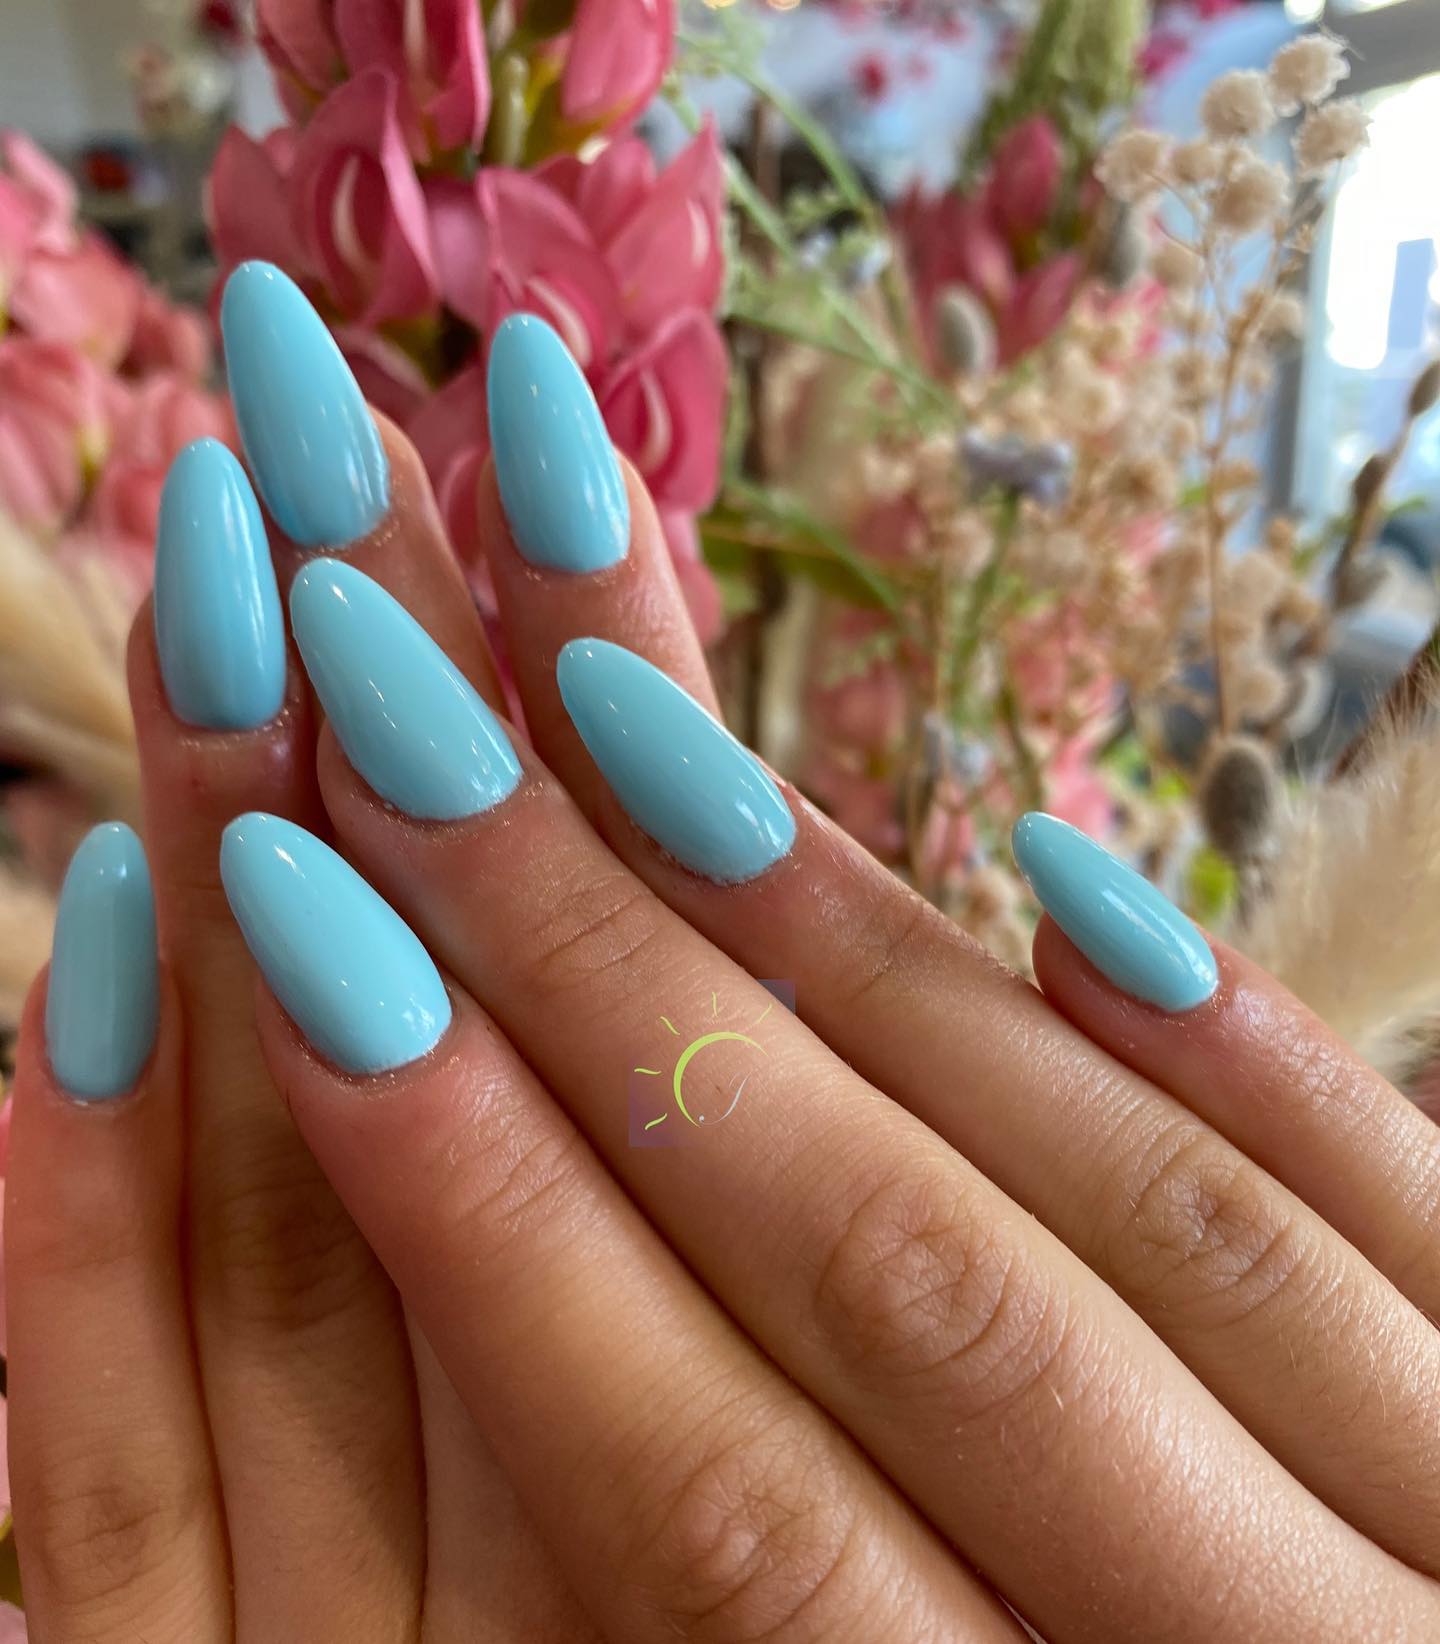 It looks more like a pastel tone of blue and it is amazing. If you want to rock this summer, you should definitely go for this mani.